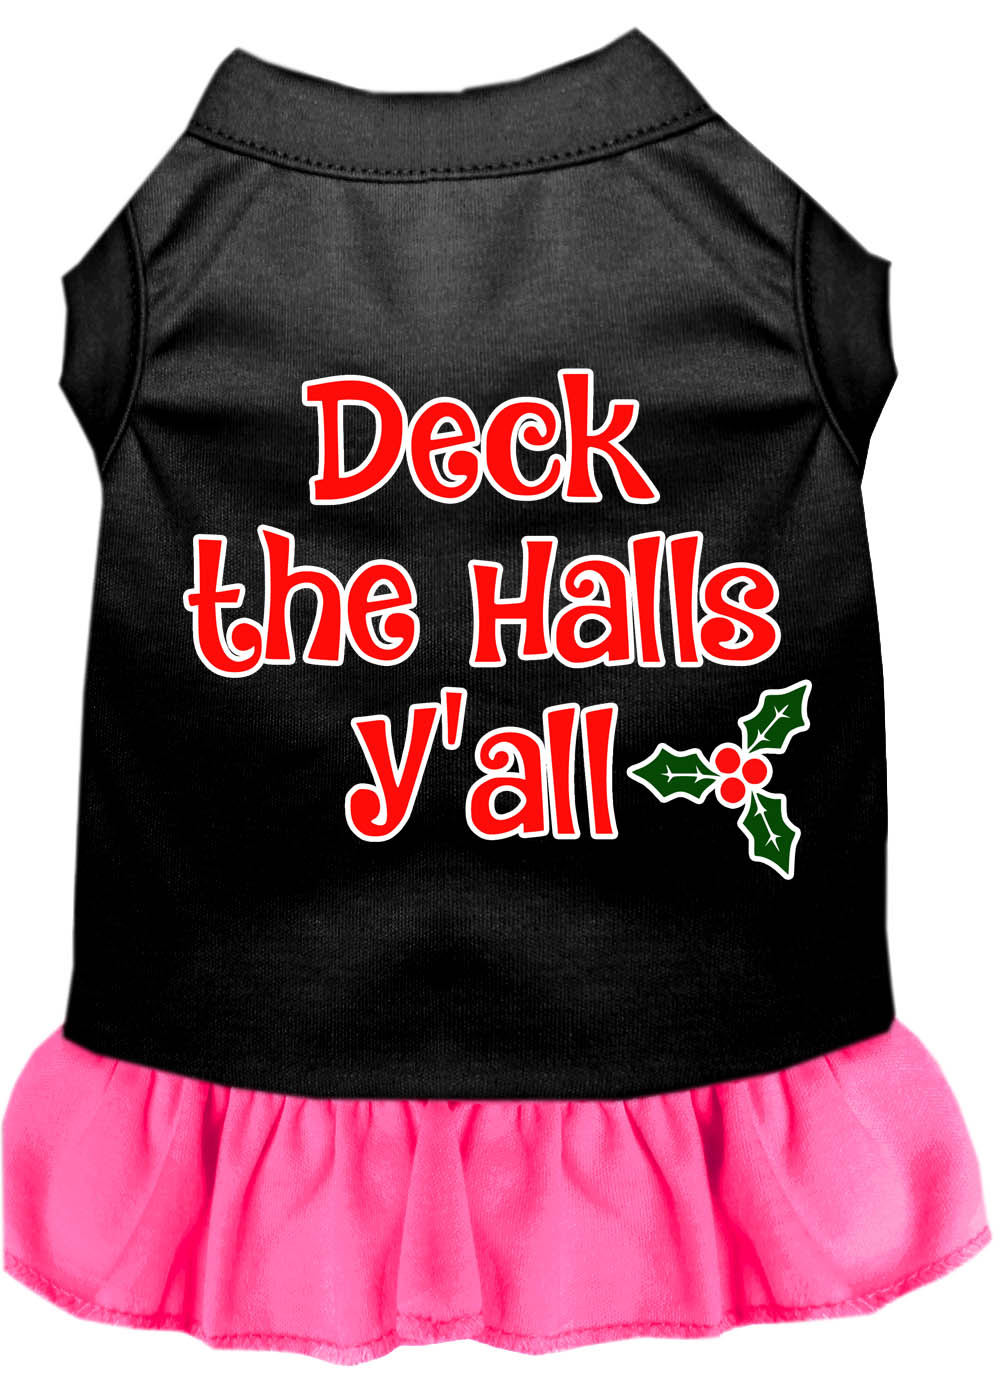 Deck the Halls Y'all Screen Print Dog Dress Black with Bright Pink Sm